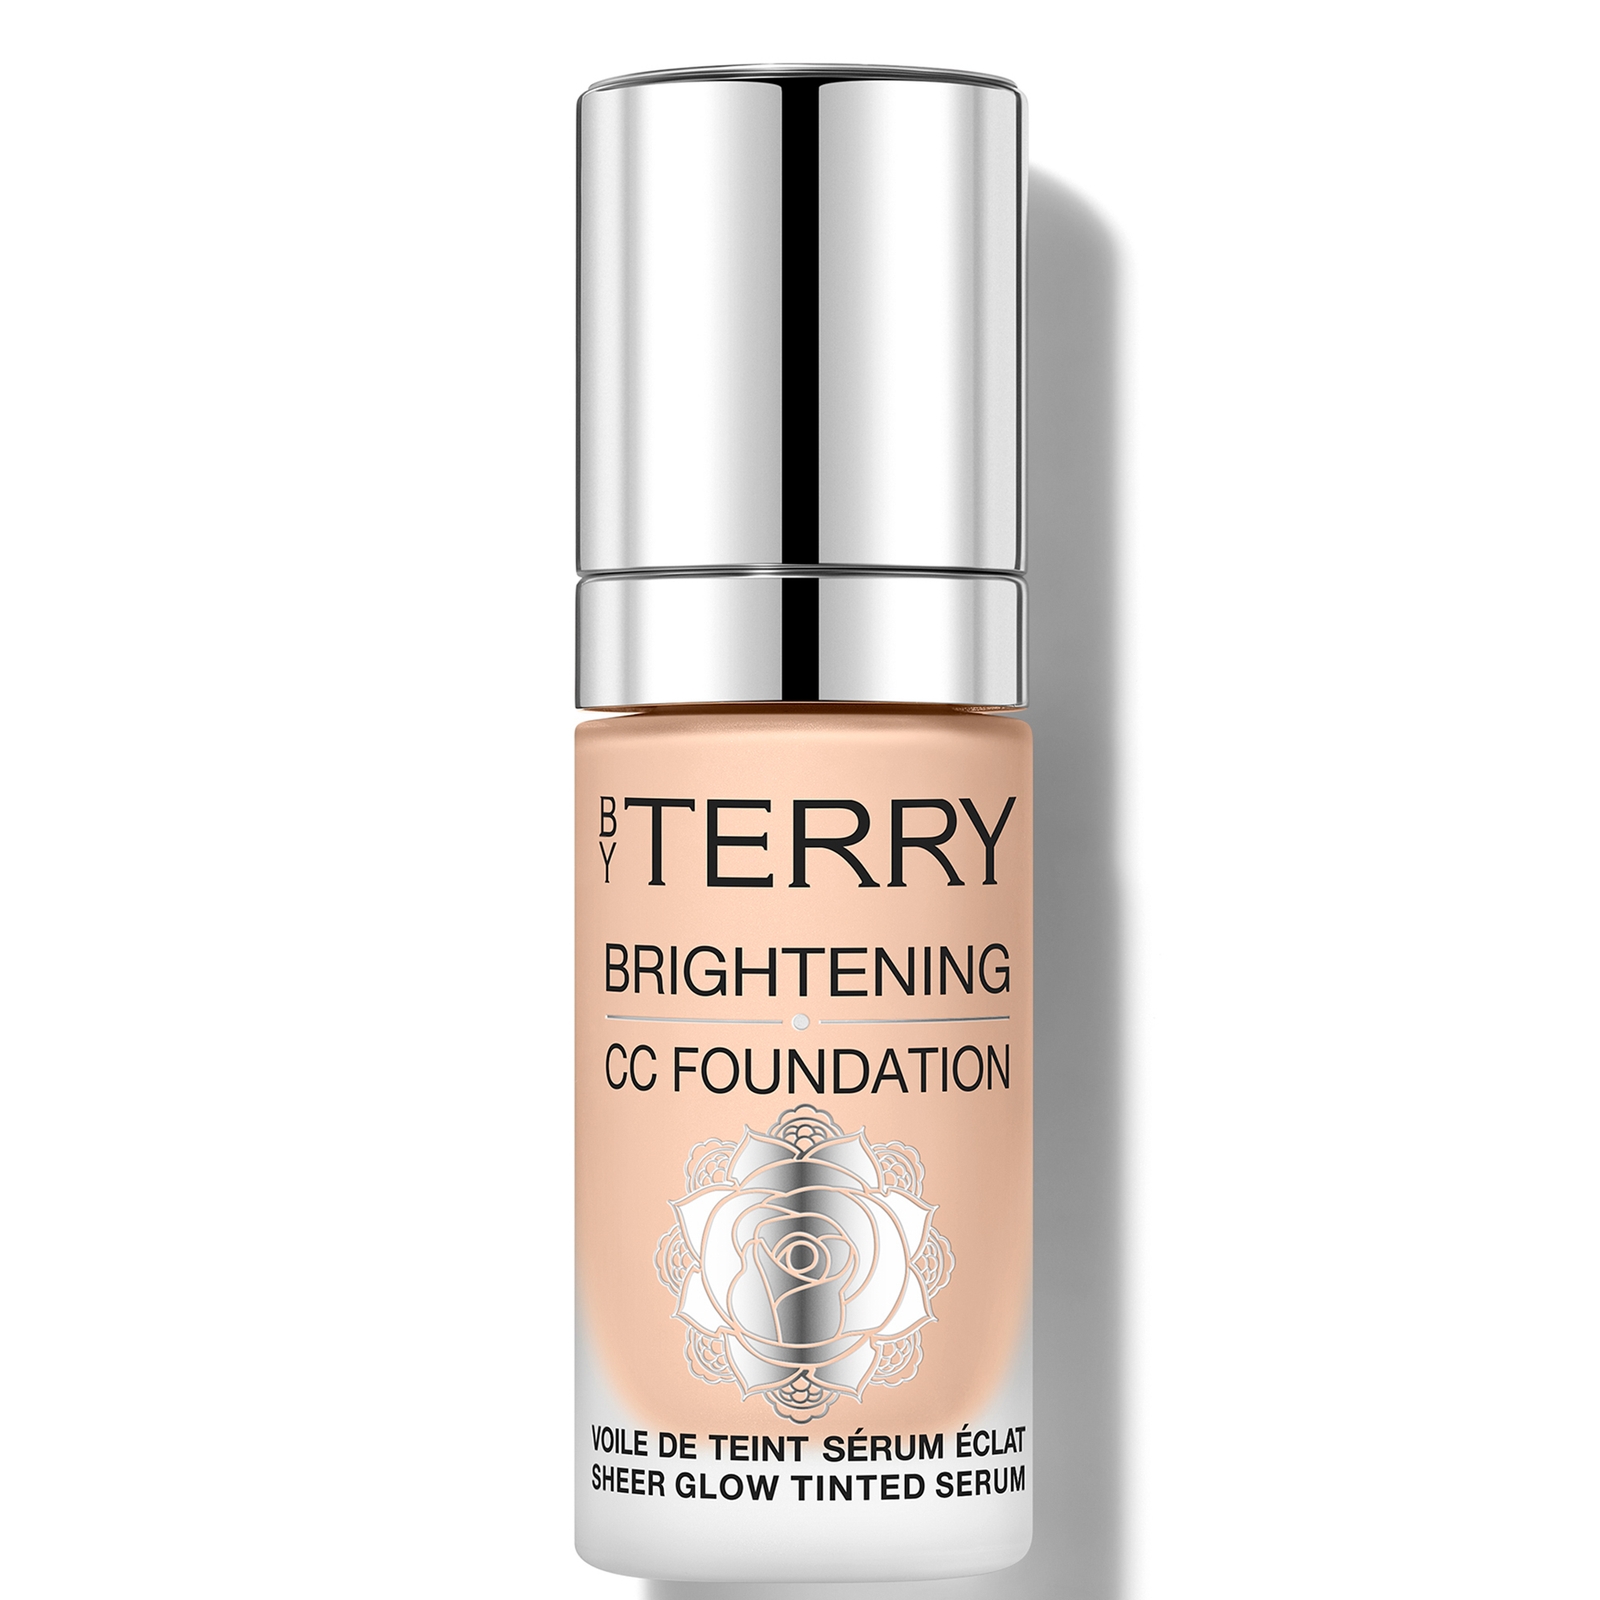 By Terry Brightening Cc Foundation 30ml (various Shades) - 3c - Medium Light Cool In White